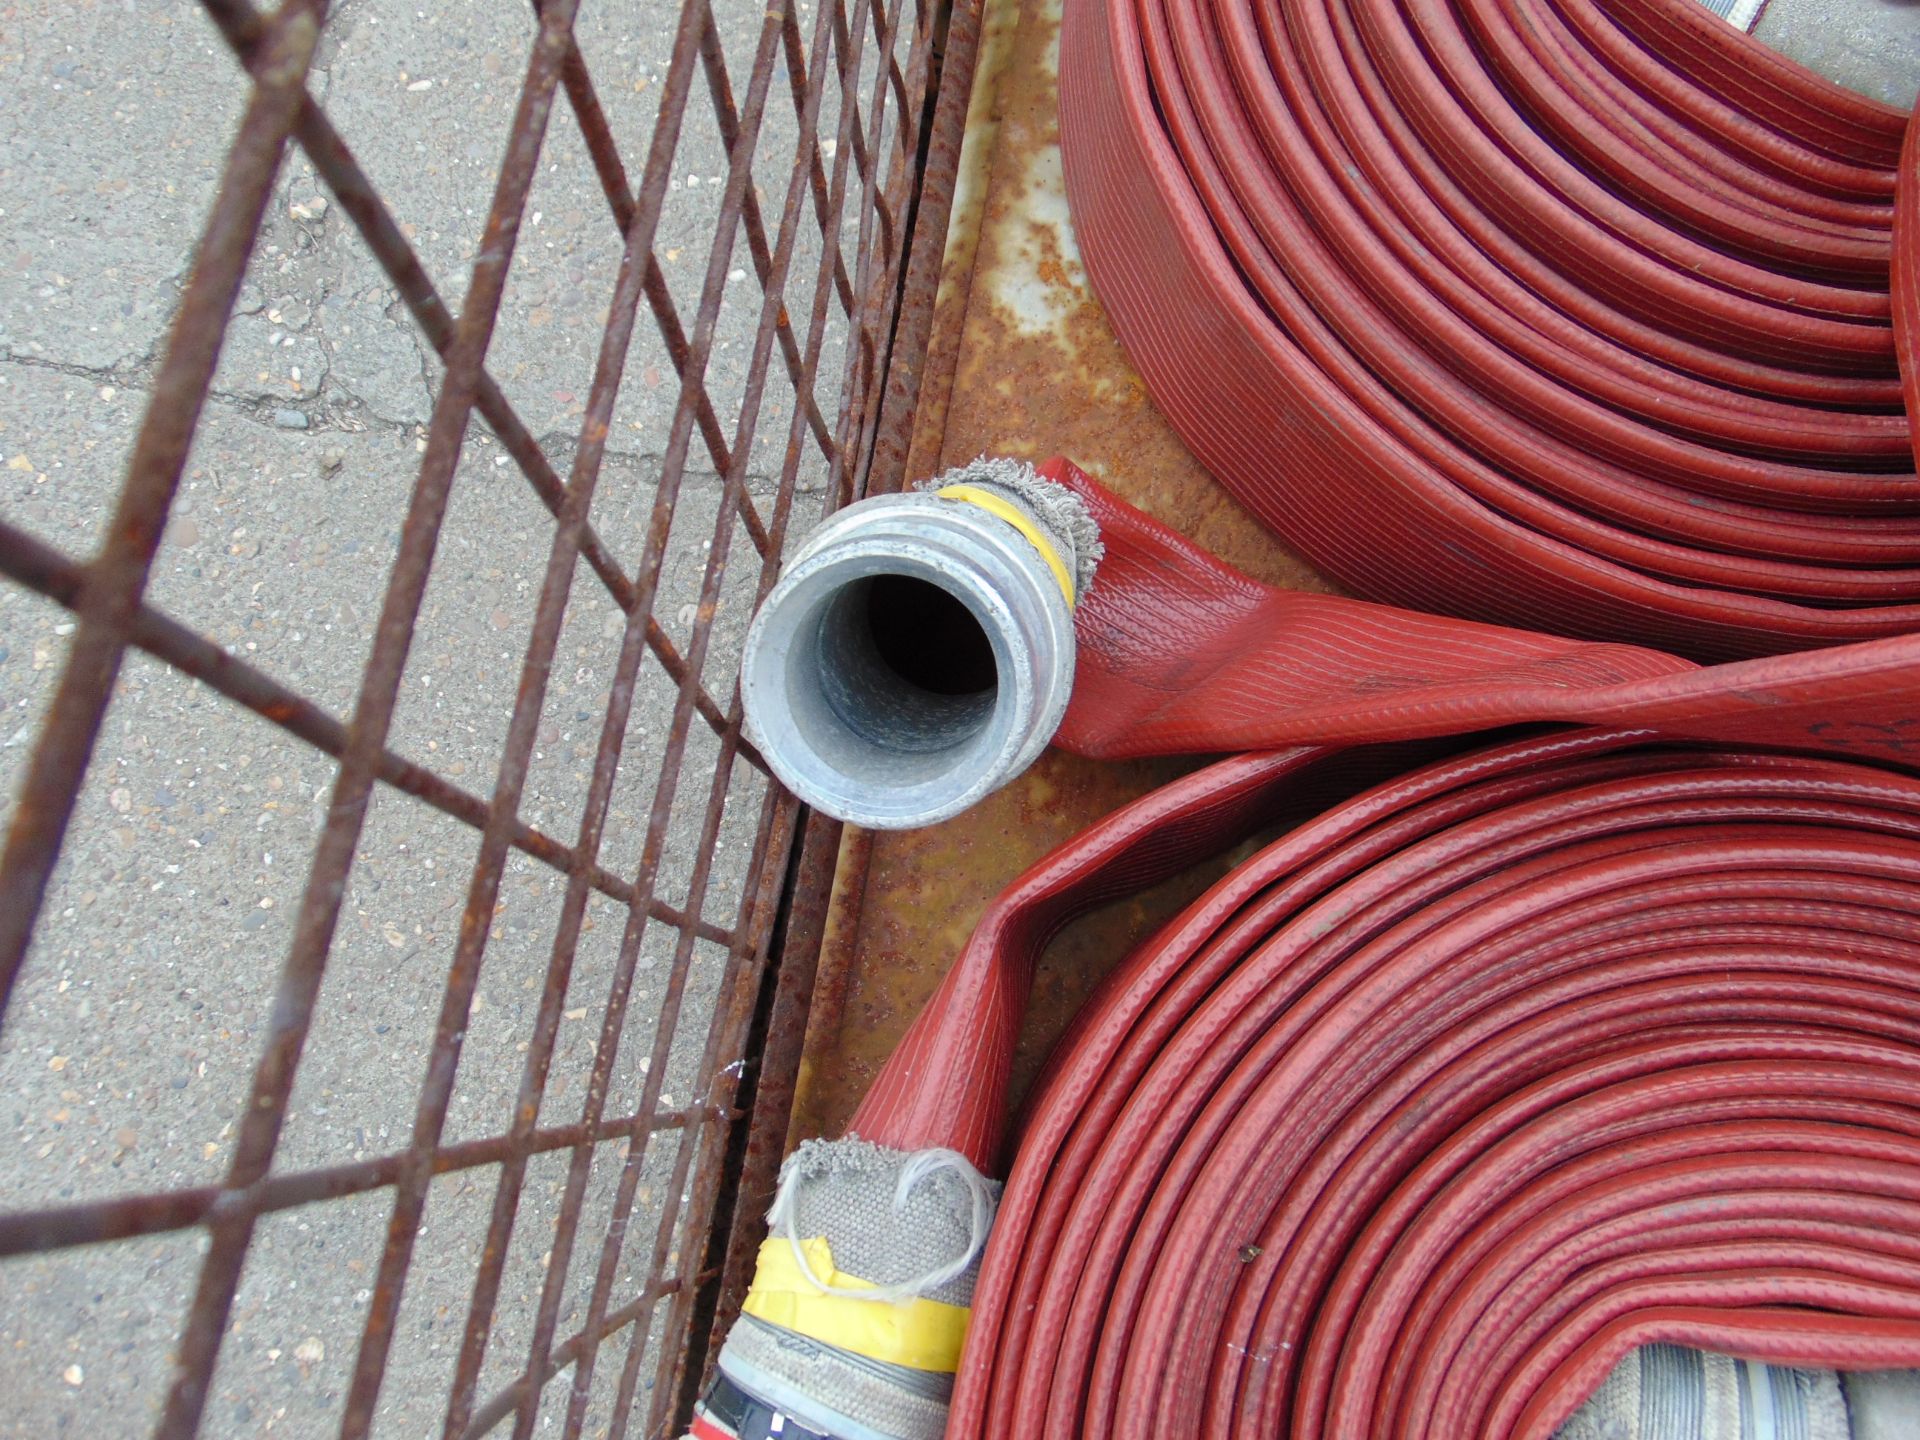 5 x Angus 64mm x 23m Layflat Fire Hoses with Couplings Sold as shown without warranty. - Bild 4 aus 4